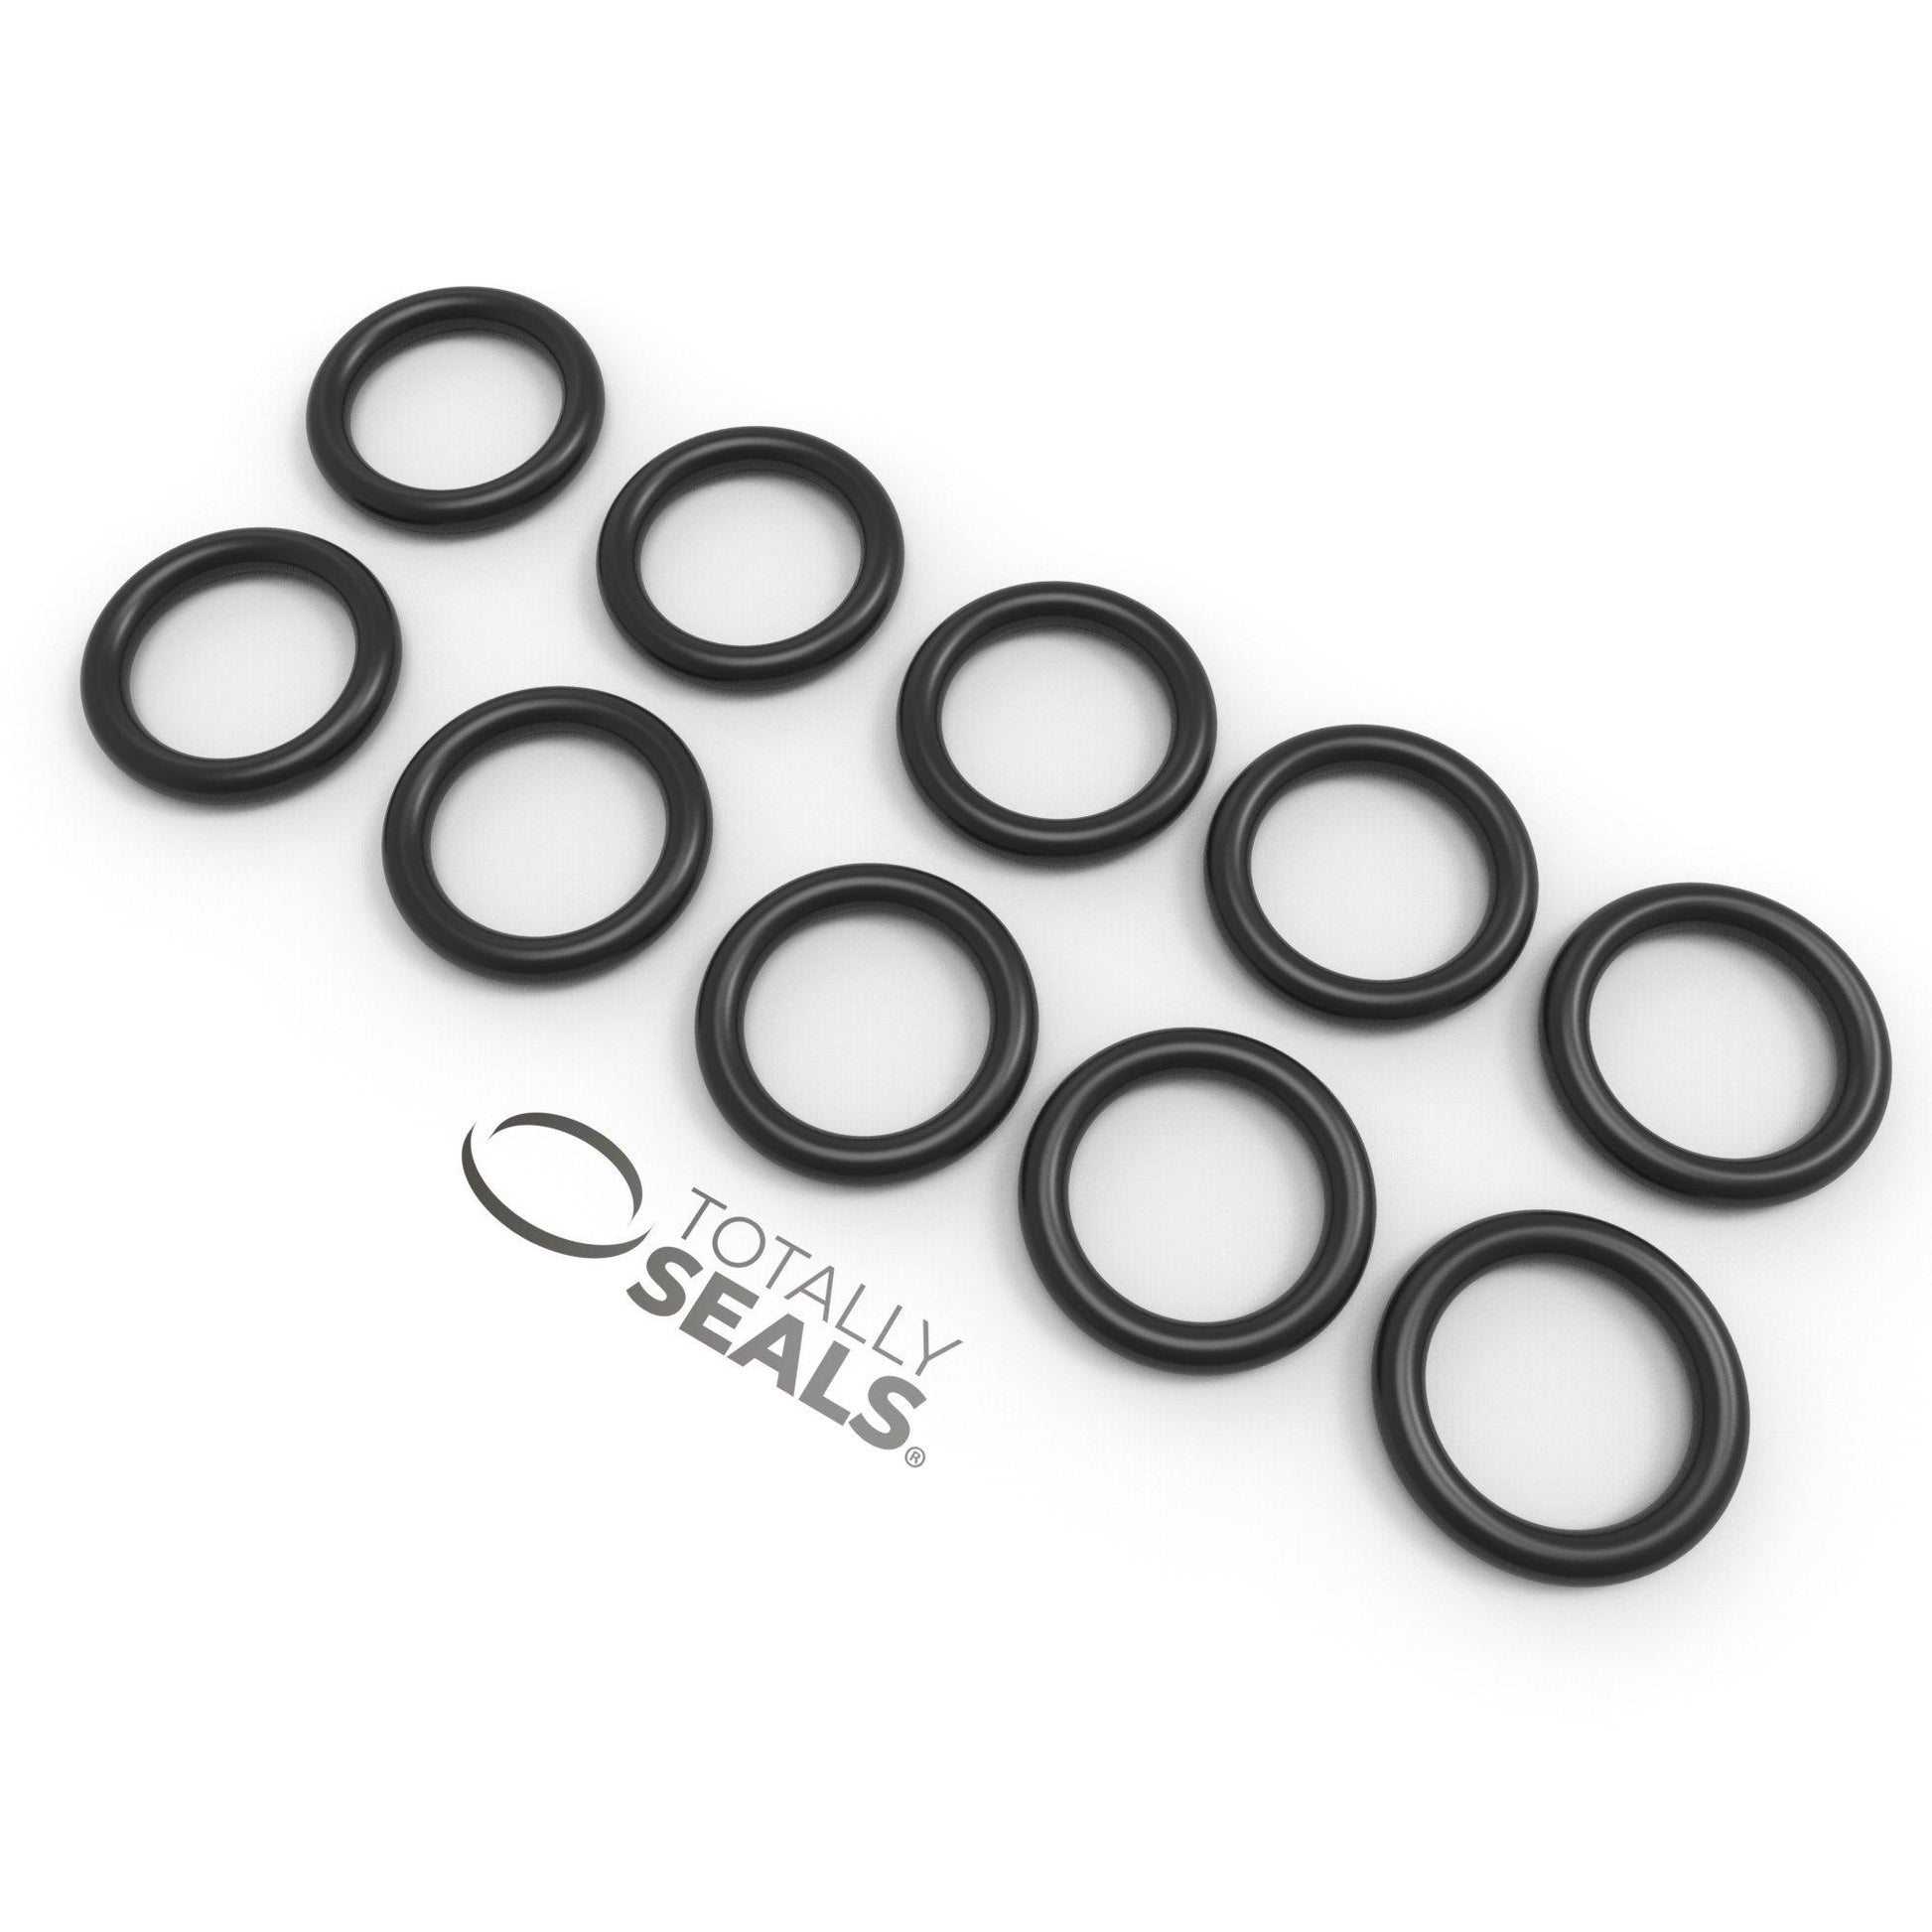 17mm x 1mm (19mm OD) Nitrile O-Rings - Totally Seals®